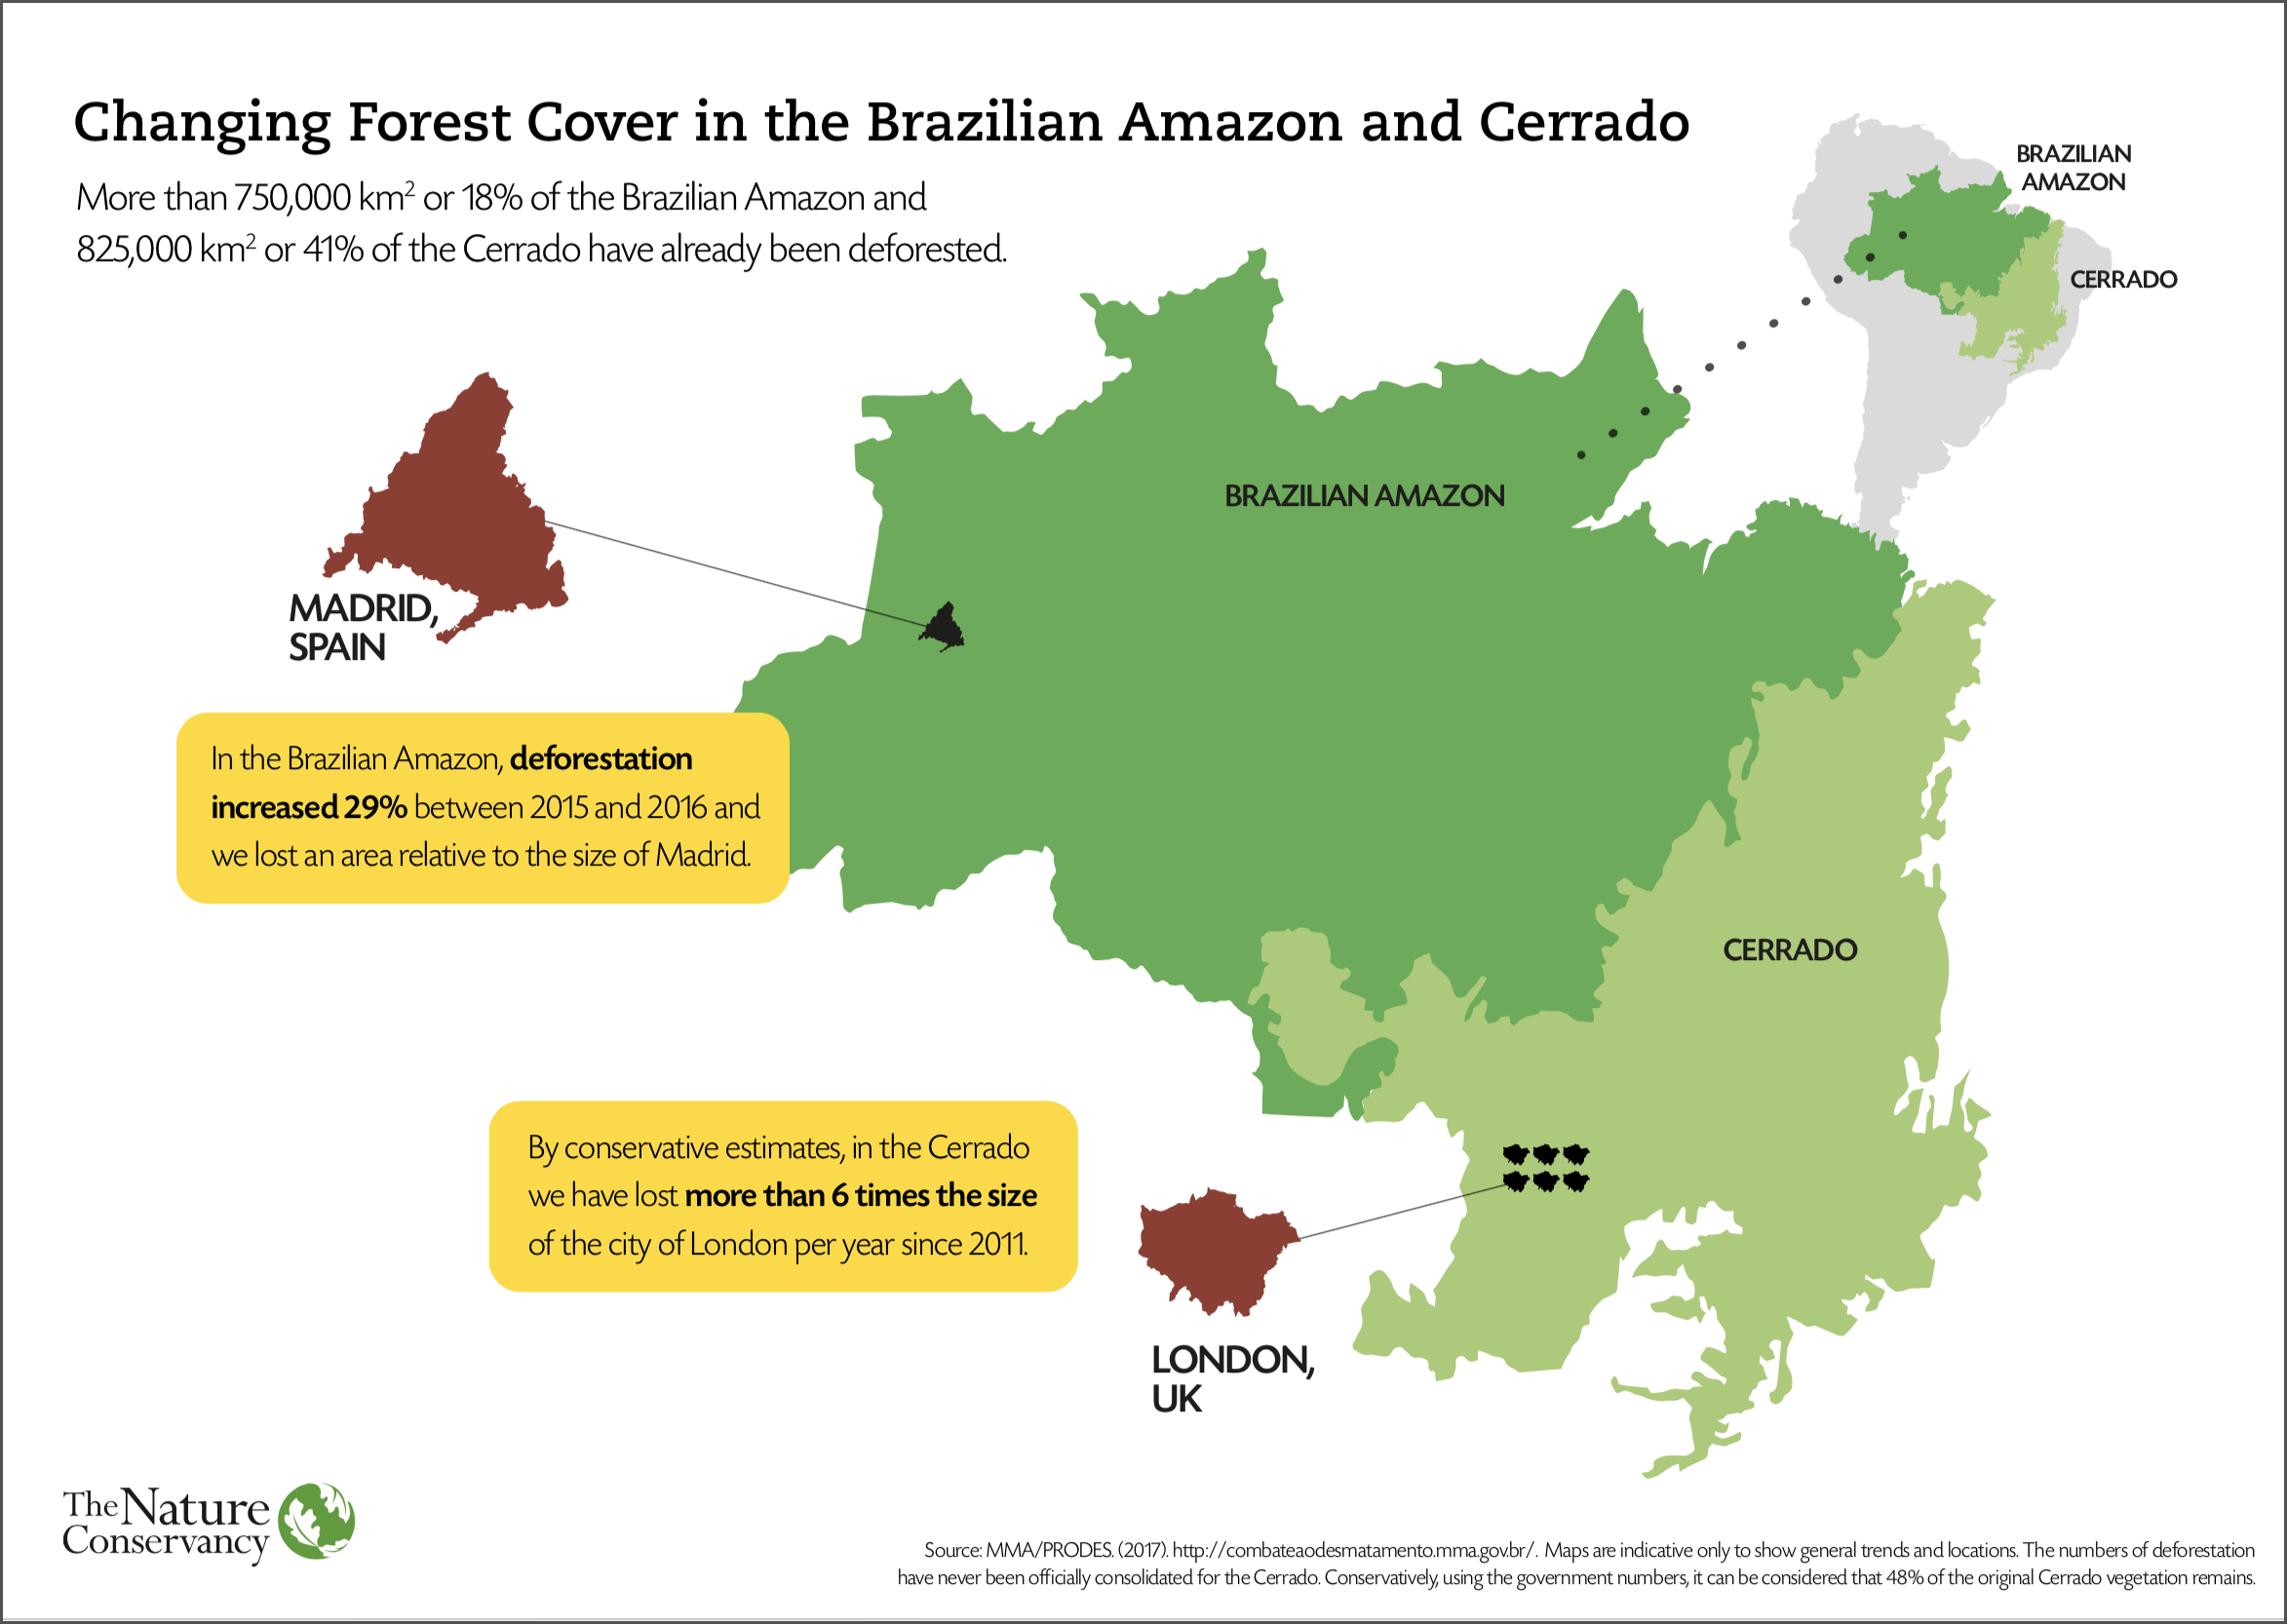 This map shows the amount of deforestation in the Brazilian Amazon and Cerrado, with comparative European city estimates.